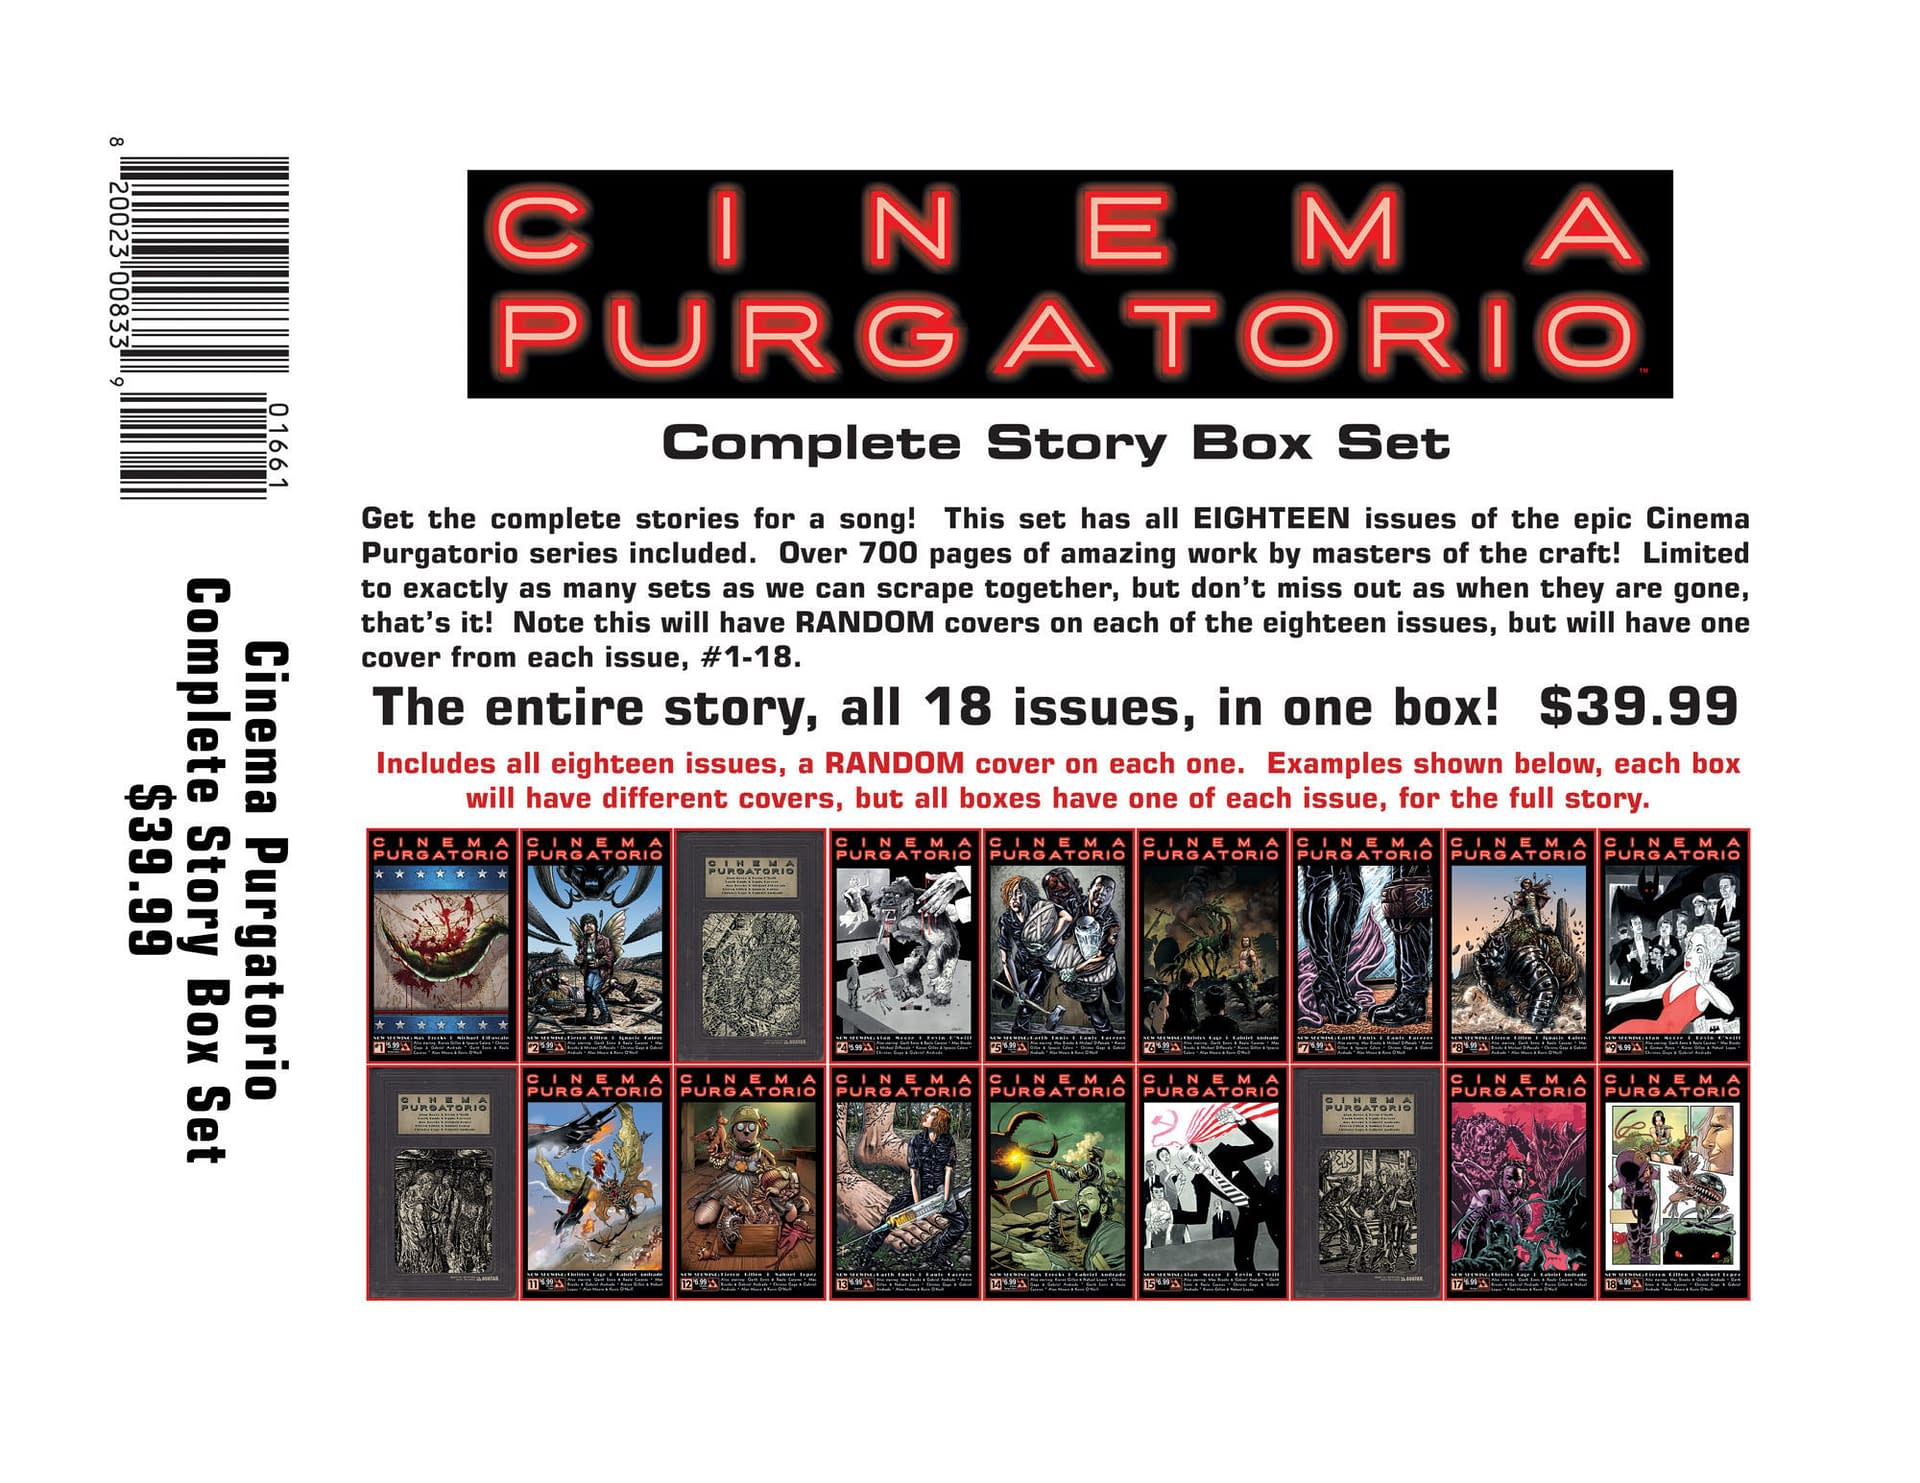 Cinema Purgatorio - 18 Issues For $40, FOC This Weekend